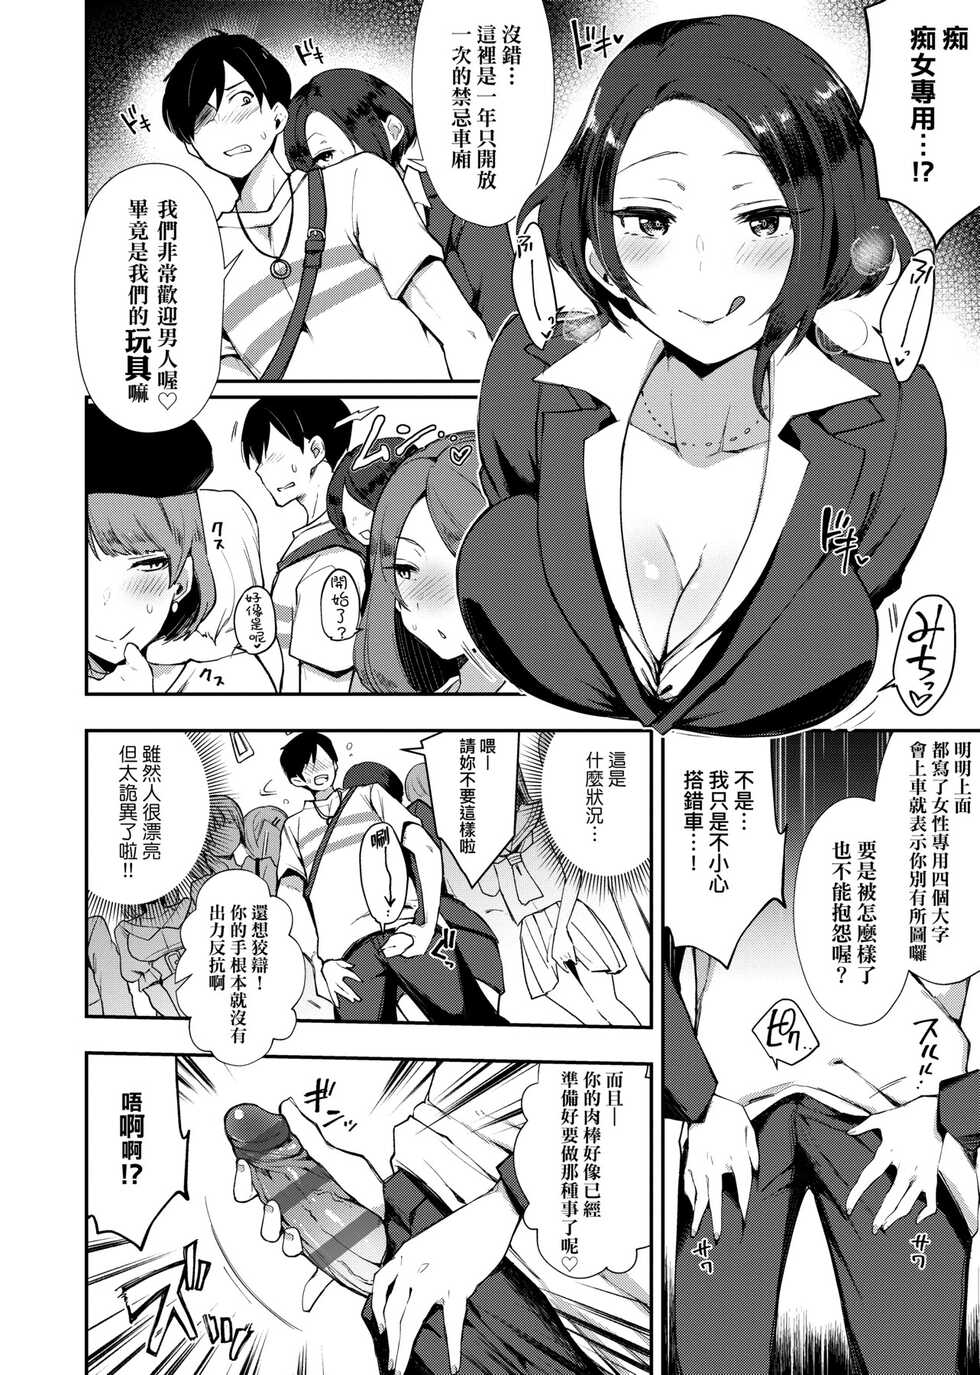 [Indo Curry] BITCH ONLY | 痴女專用車＜Bitch Only＞ 特裝版 [Chinese] [Digital] - Page 11